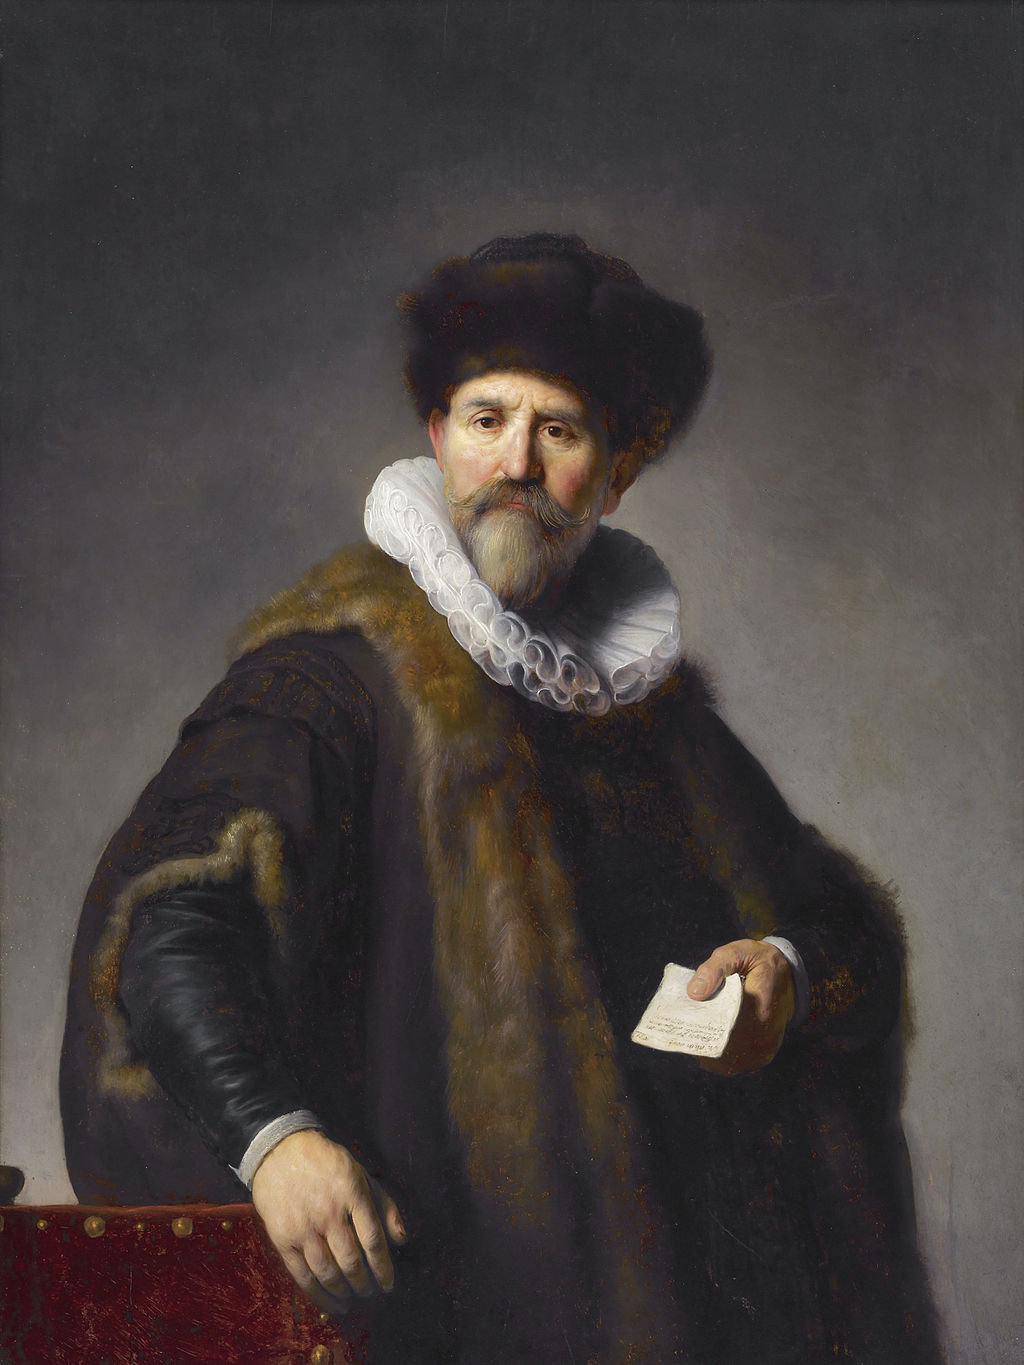 Portrait of Nicolaes Ruts Painting by Rembrandt Oil on Canvas Reproduction by Blue Surf Art